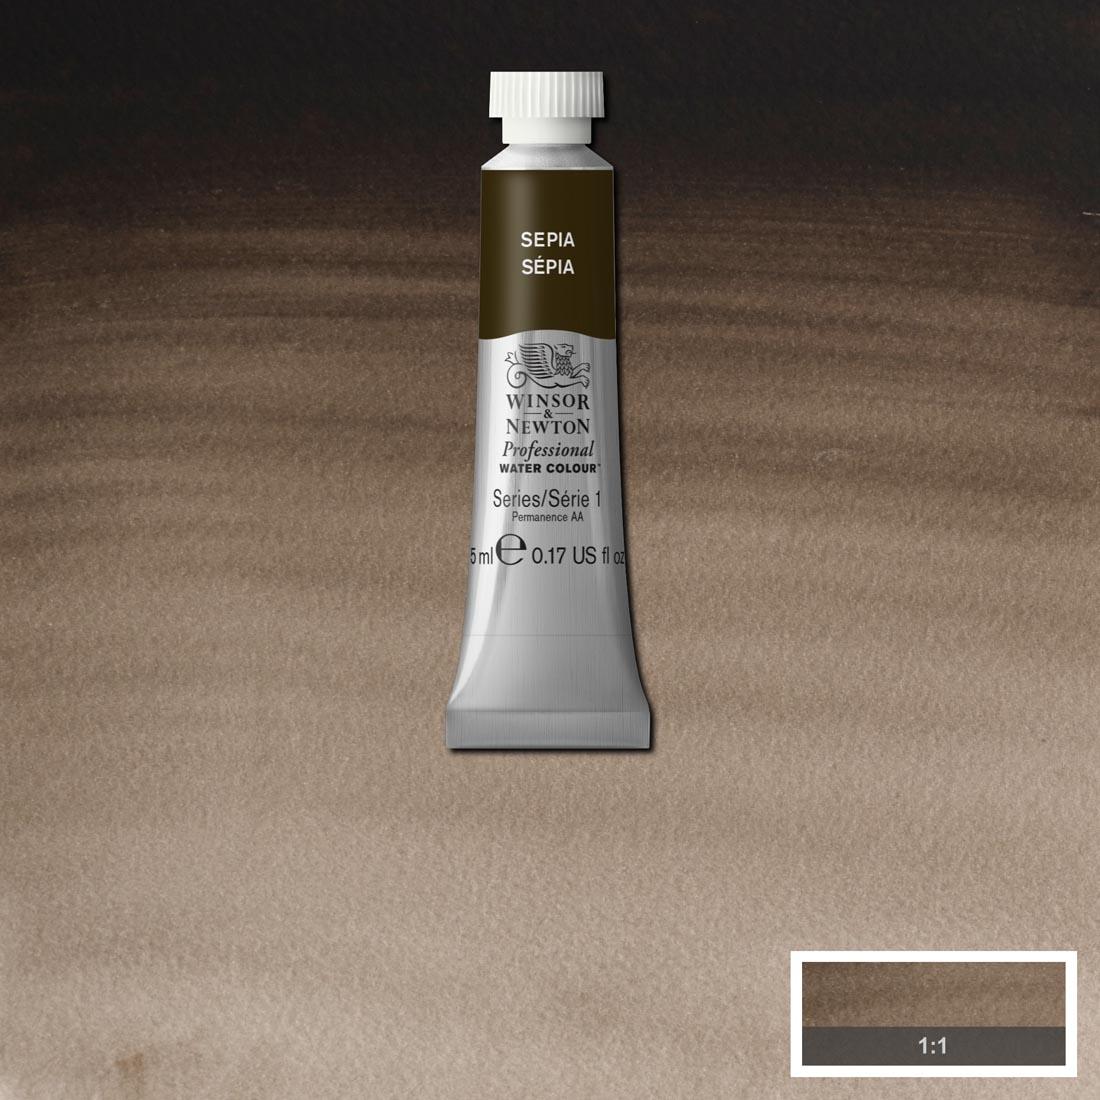 Tube of Sepia Winsor & Newton Professional Water Colour with a paint swatch for the background